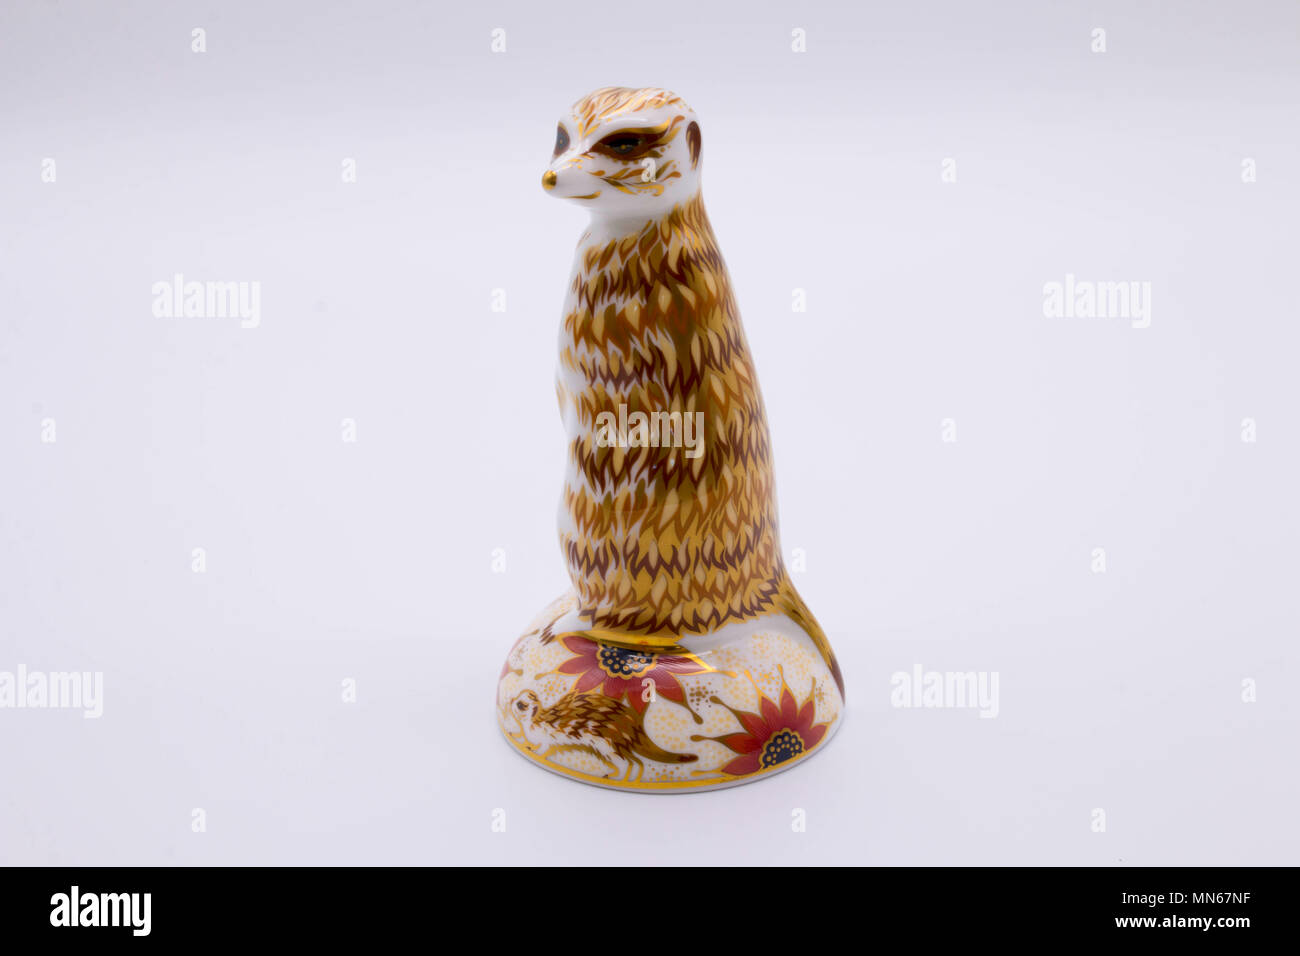 Royal Crown Derby bone china paperweight of a meerkat uk Stock Photo